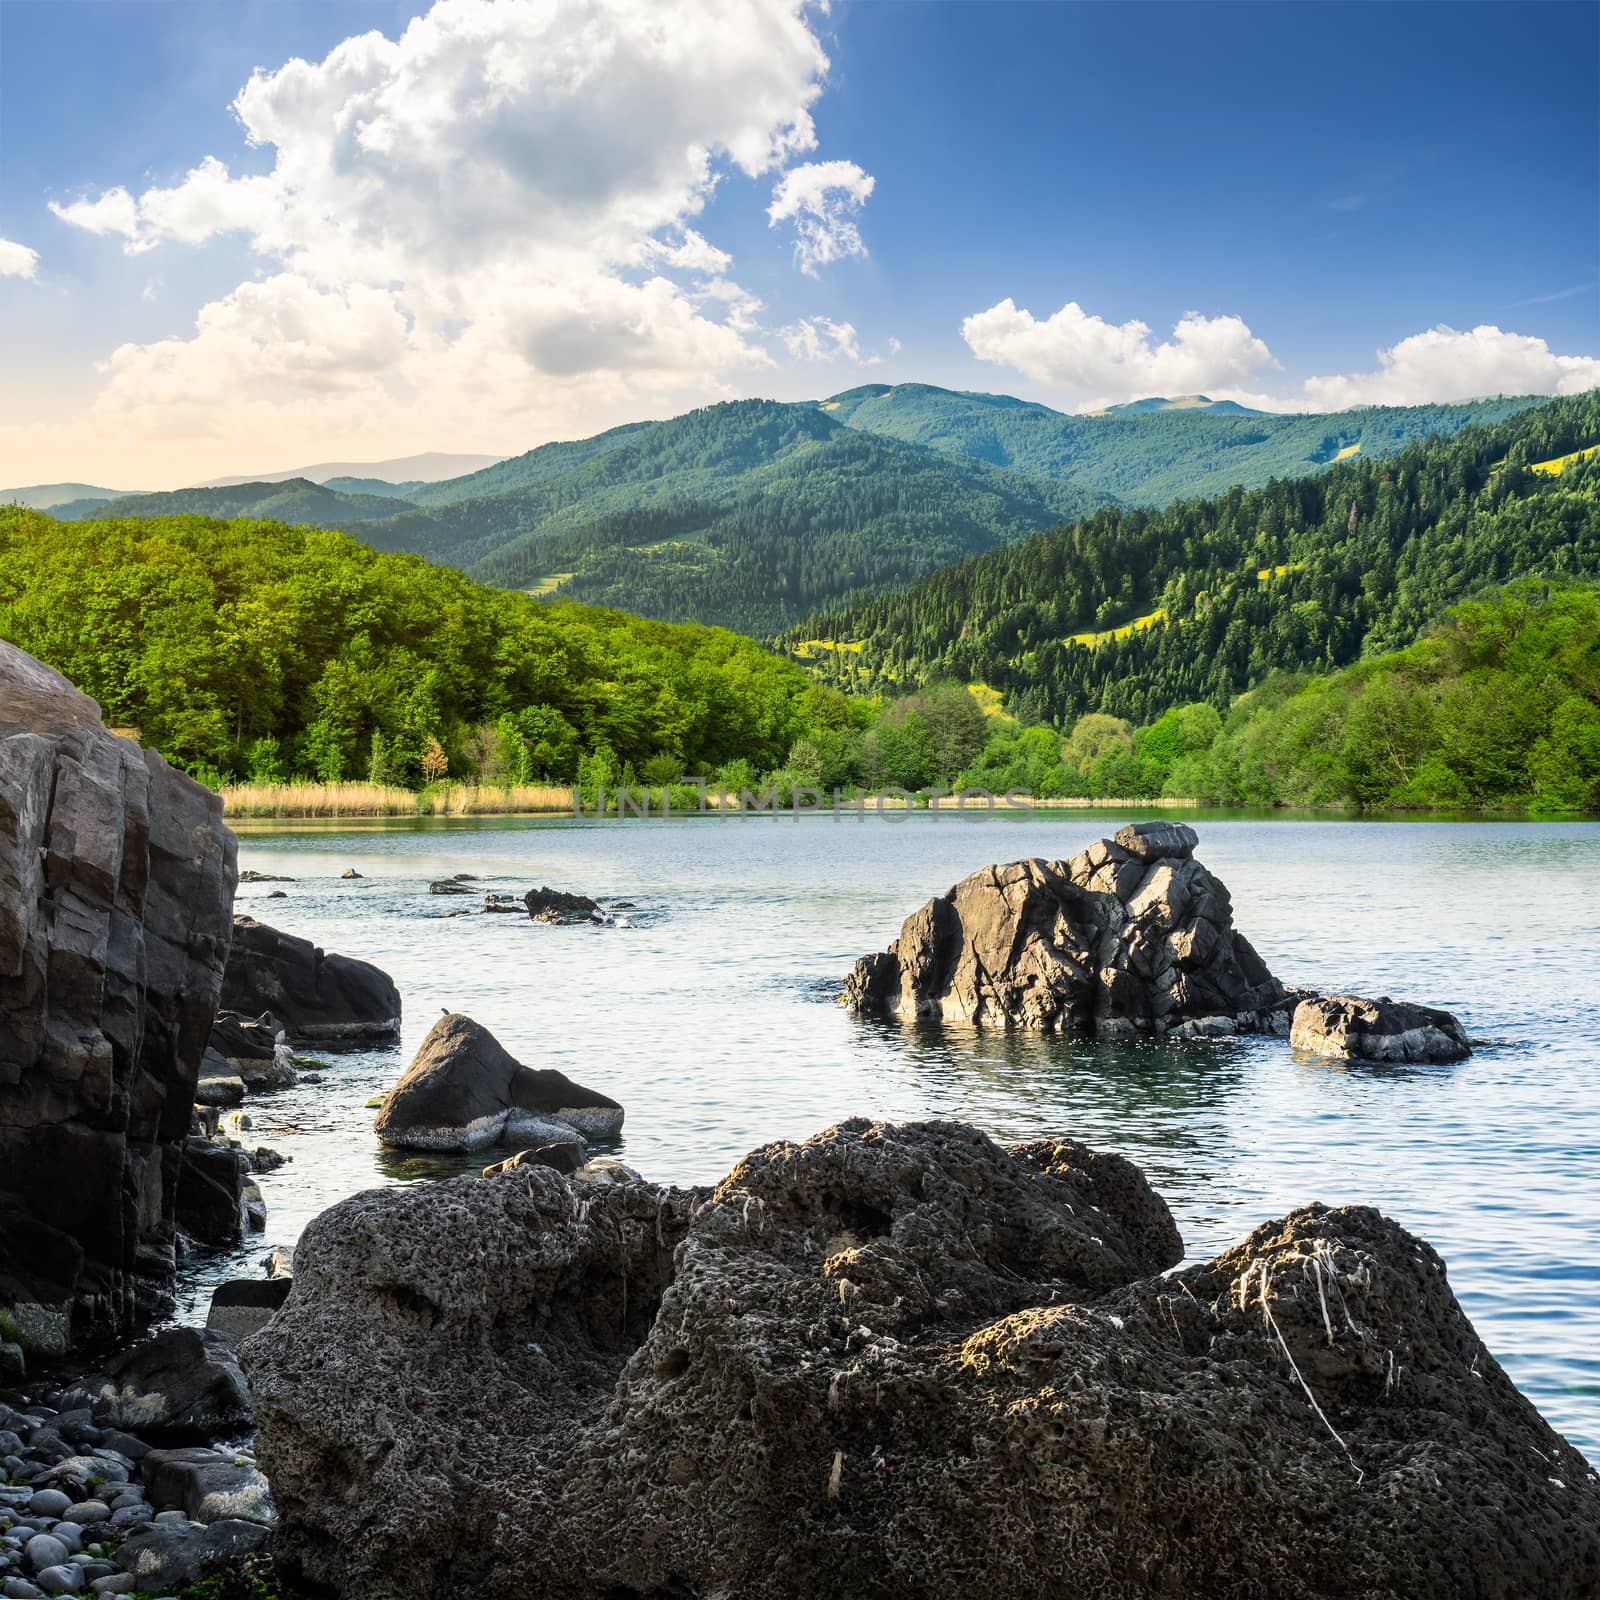 lake shore with stones near forest on mountain by Pellinni